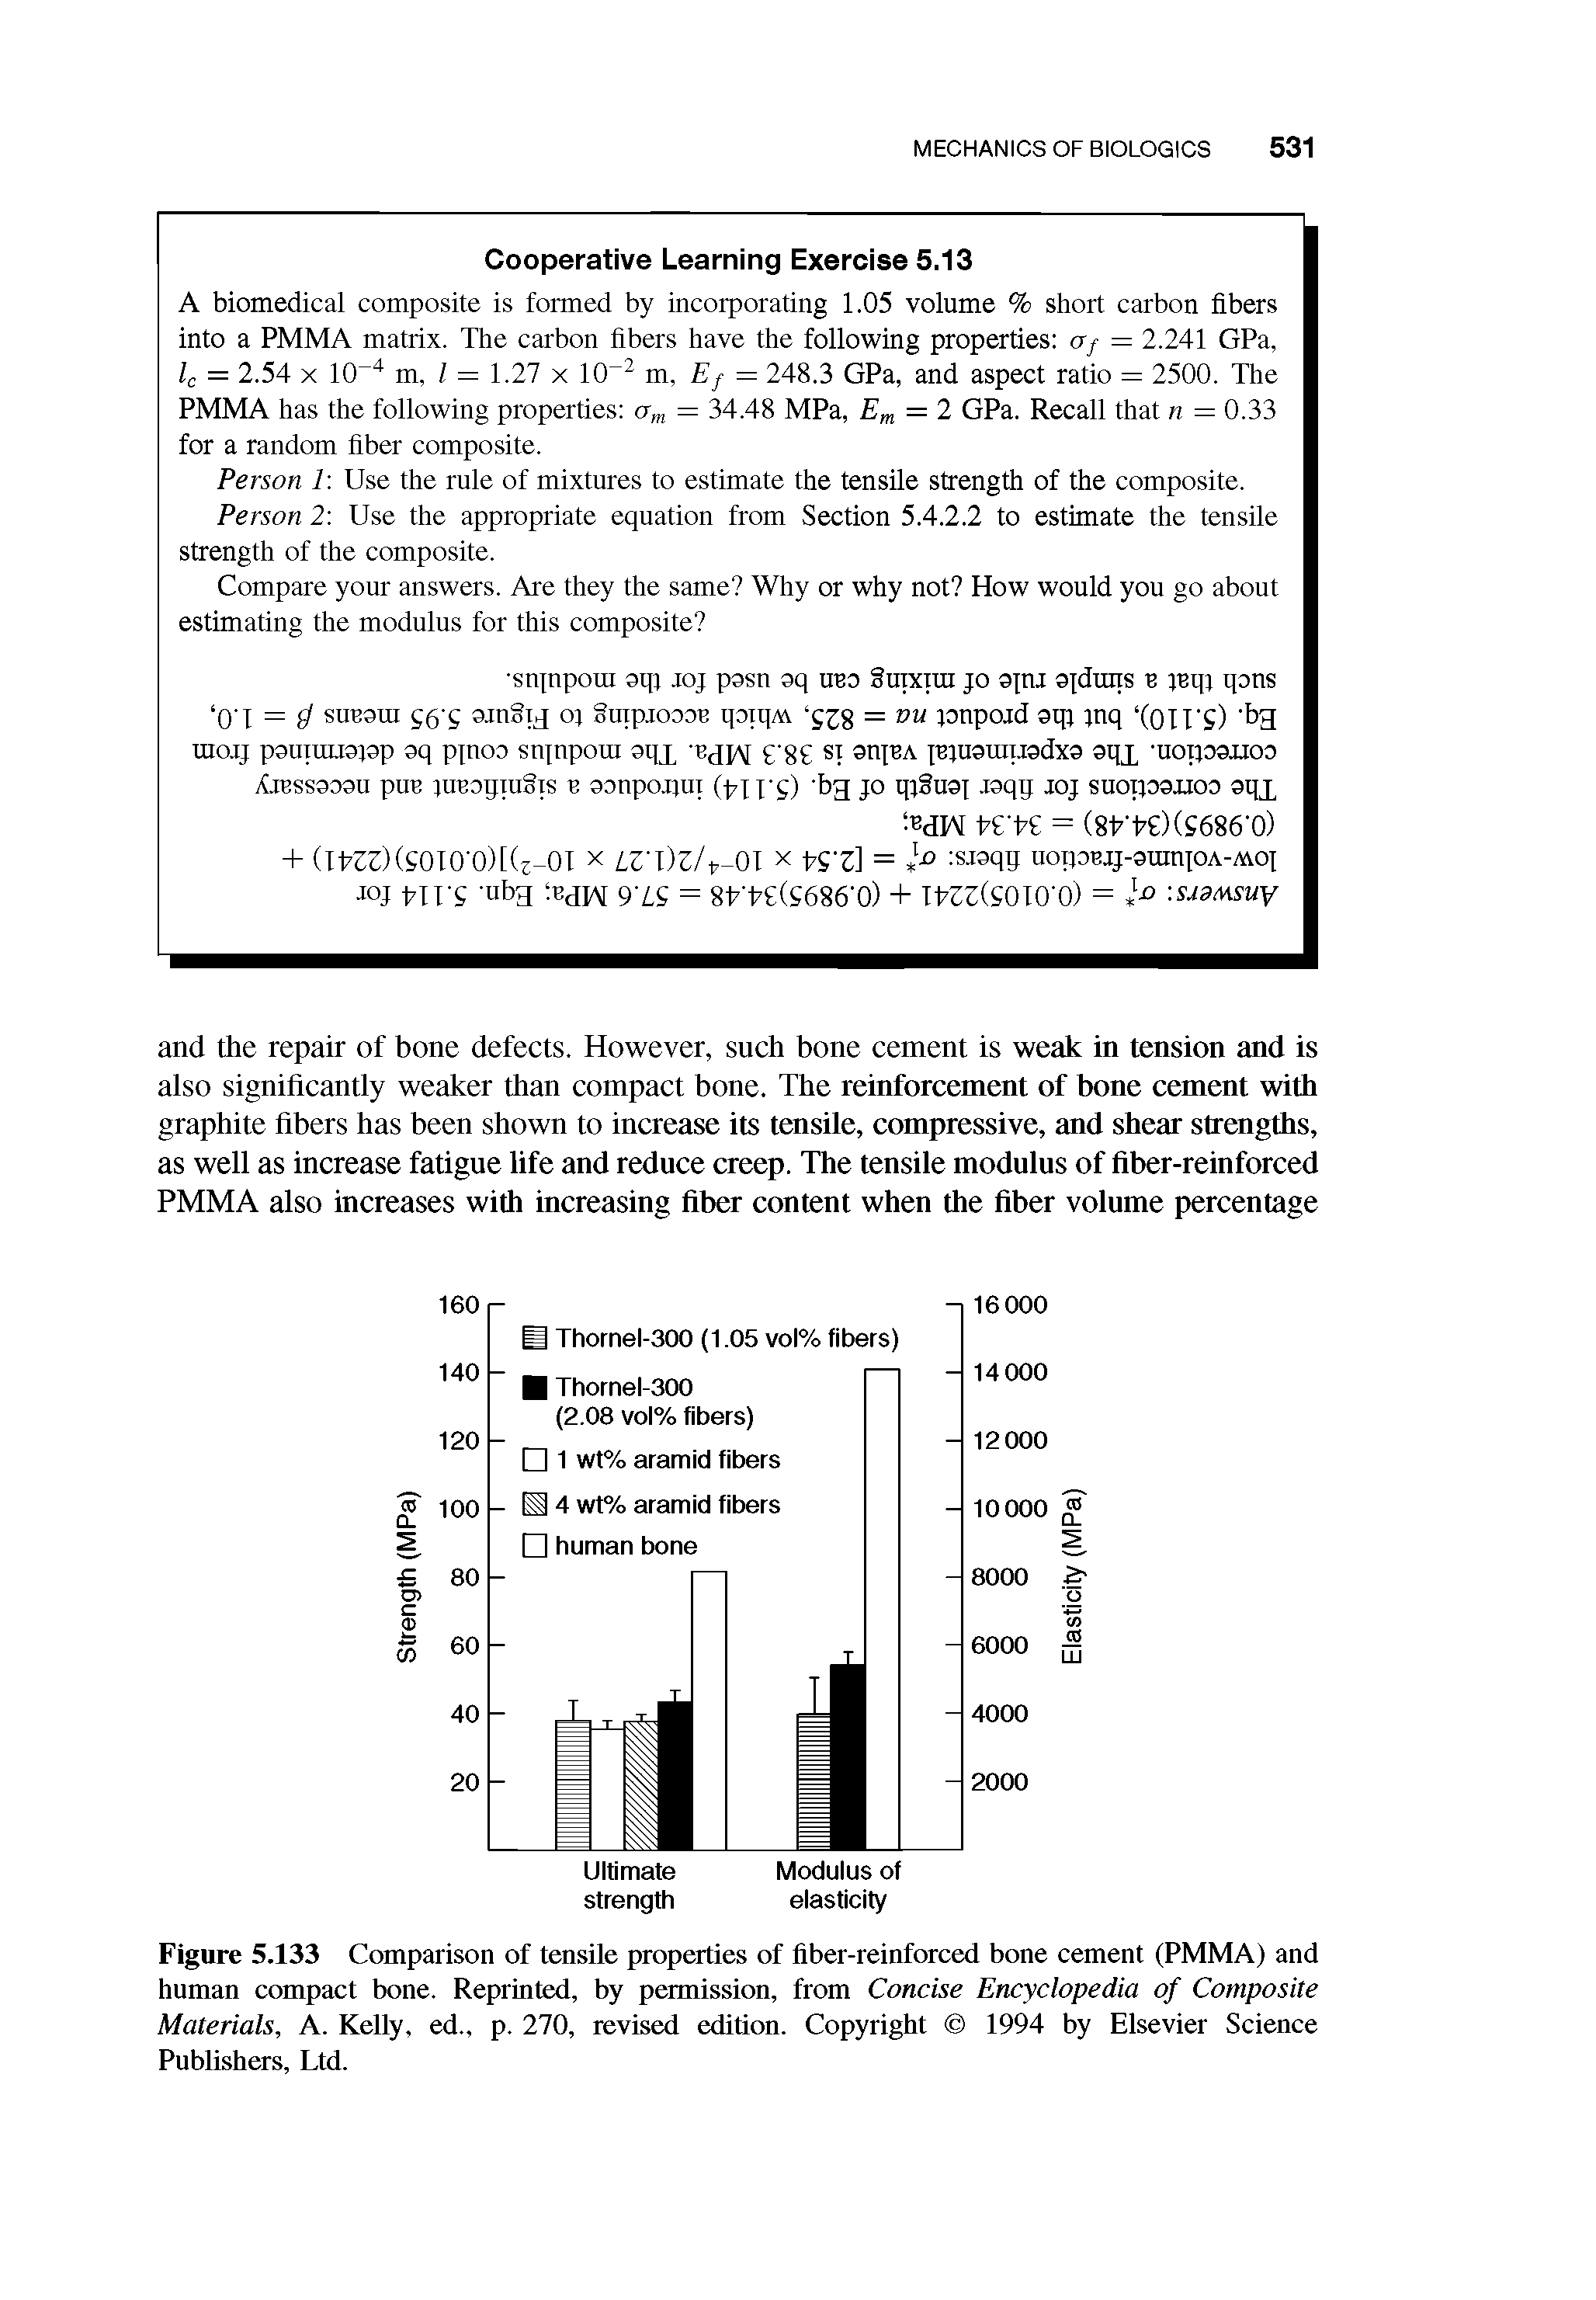 Figure 5.133 Comparison of tensile properties of fiber-reinforced bone cement (PMMA) and human compact bone. Reprinted, by permission, from Concise Encyclopedia of Composite Materials, A. Kelly, ed., p. 270, revised edition. Copyright 1994 by Elsevier Science Publishers, Ltd.